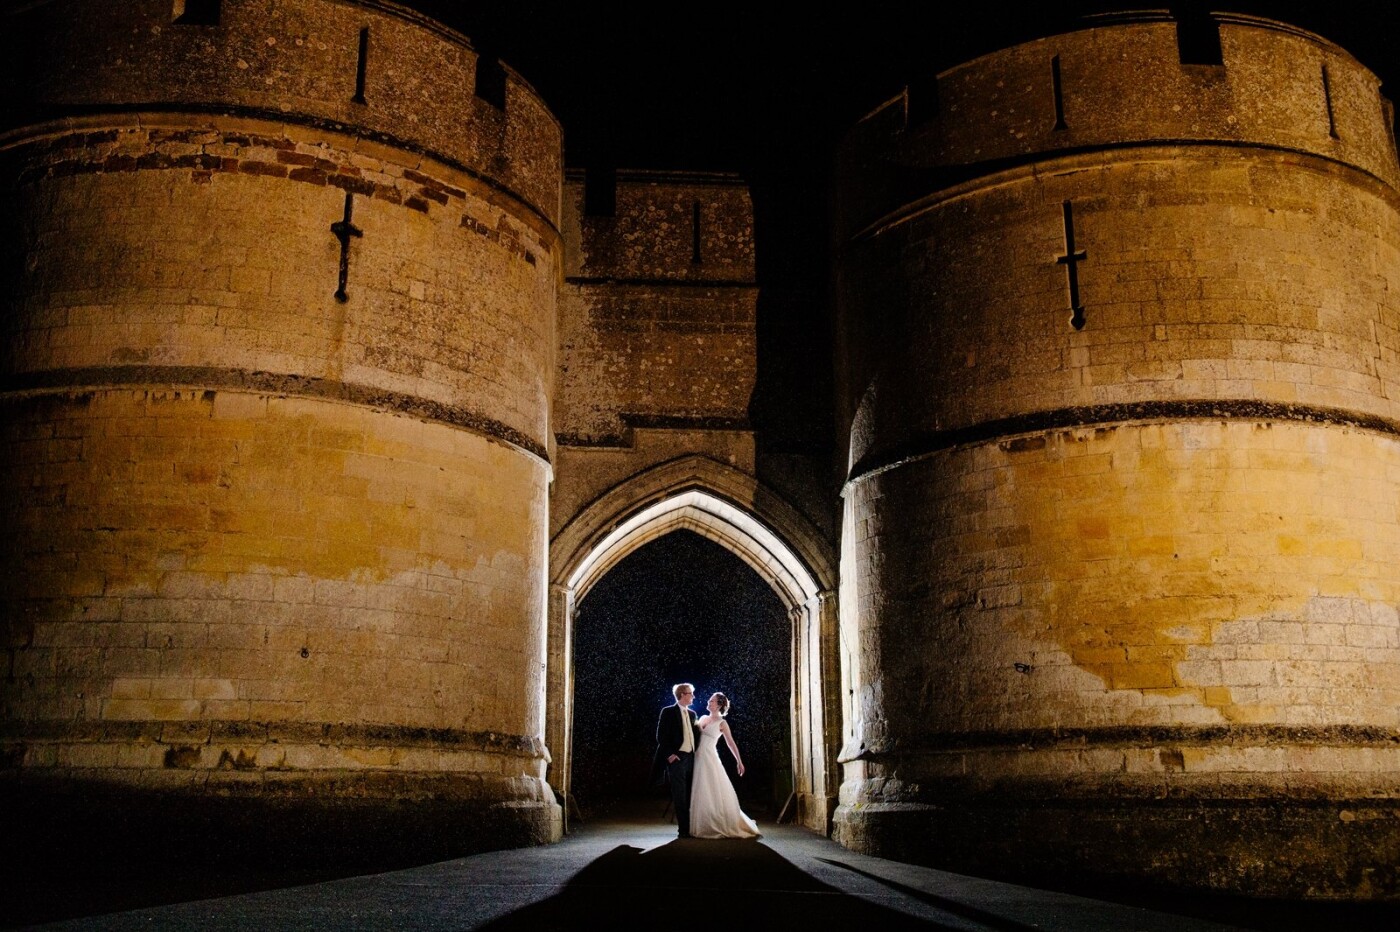 This was one of the very last images I took on the wedding day of Lauren & Charlie which took place at the fabulous venue of Rockingham Castle in Northamptonshire. I’d planned to do an evening shot like this once I’d arrived and seen this impressive entrance into the venue. We’d had glorious weather all day and just as night fell it started to rain - which with the backlighting has added something a little bit extra to the image.